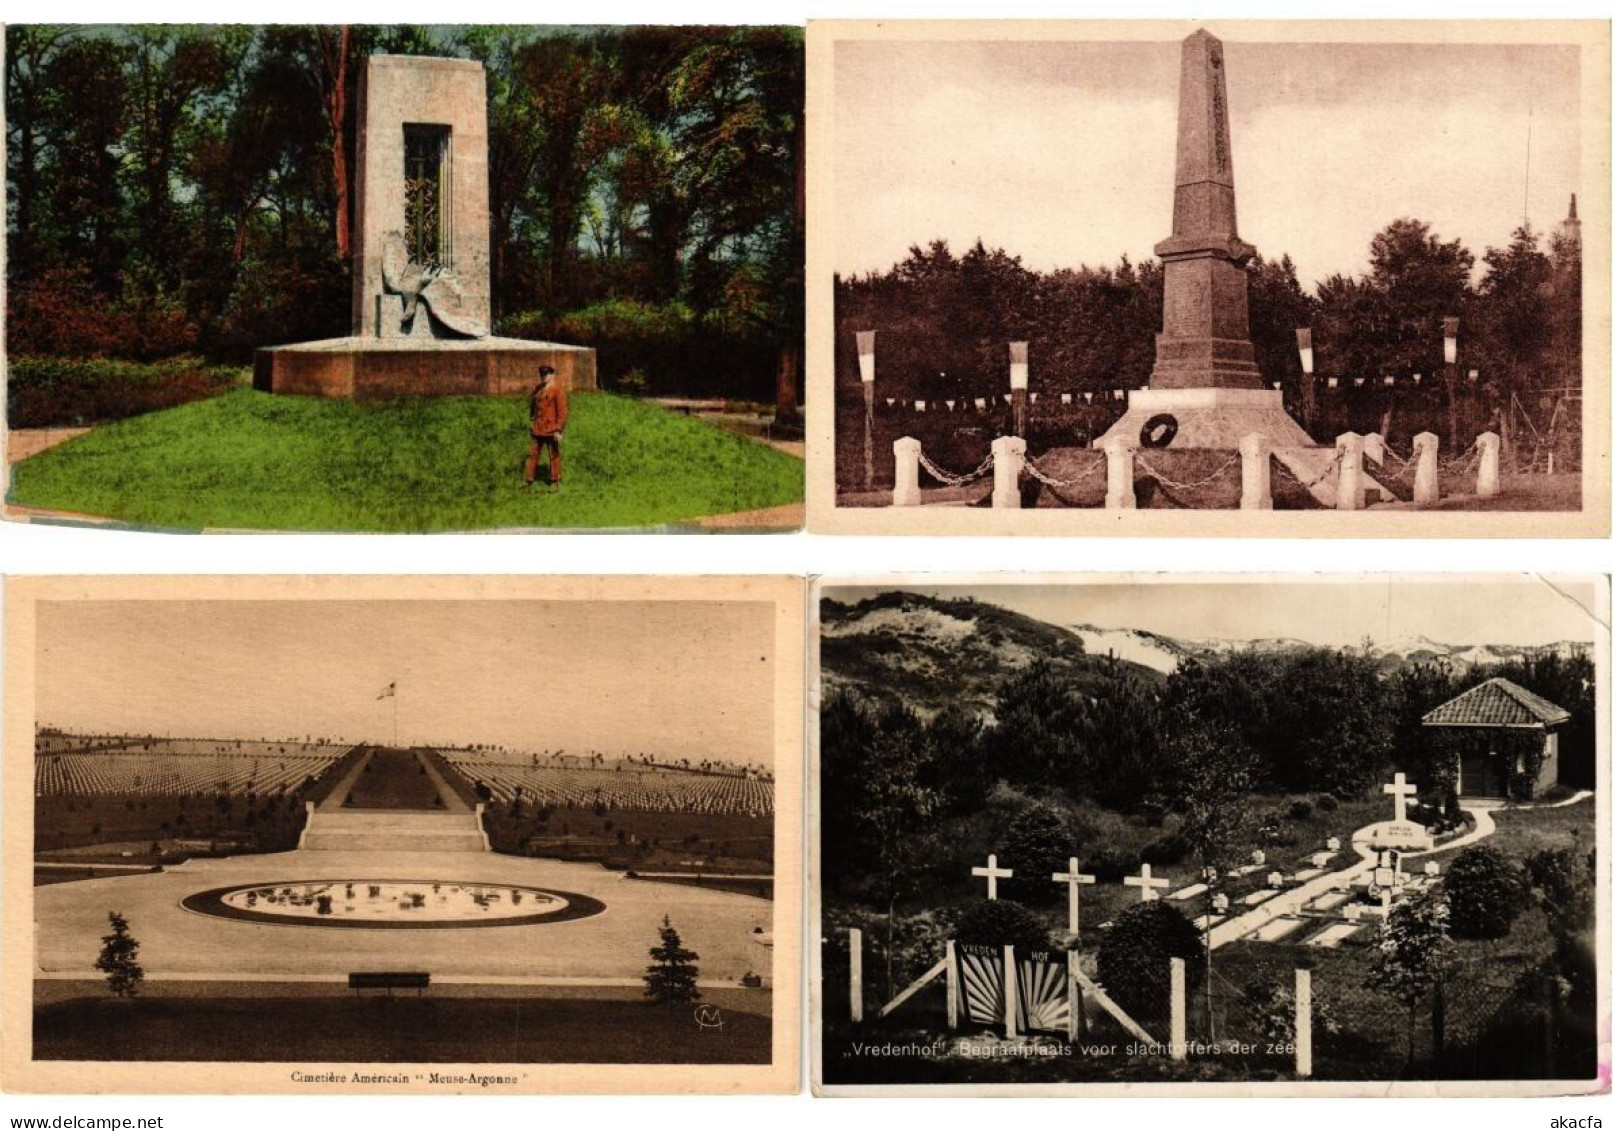 FUNERALS CEMETERIES MOSTLY MILITARY, 92 Old Postcards Mostly pre-1950 (L6215)